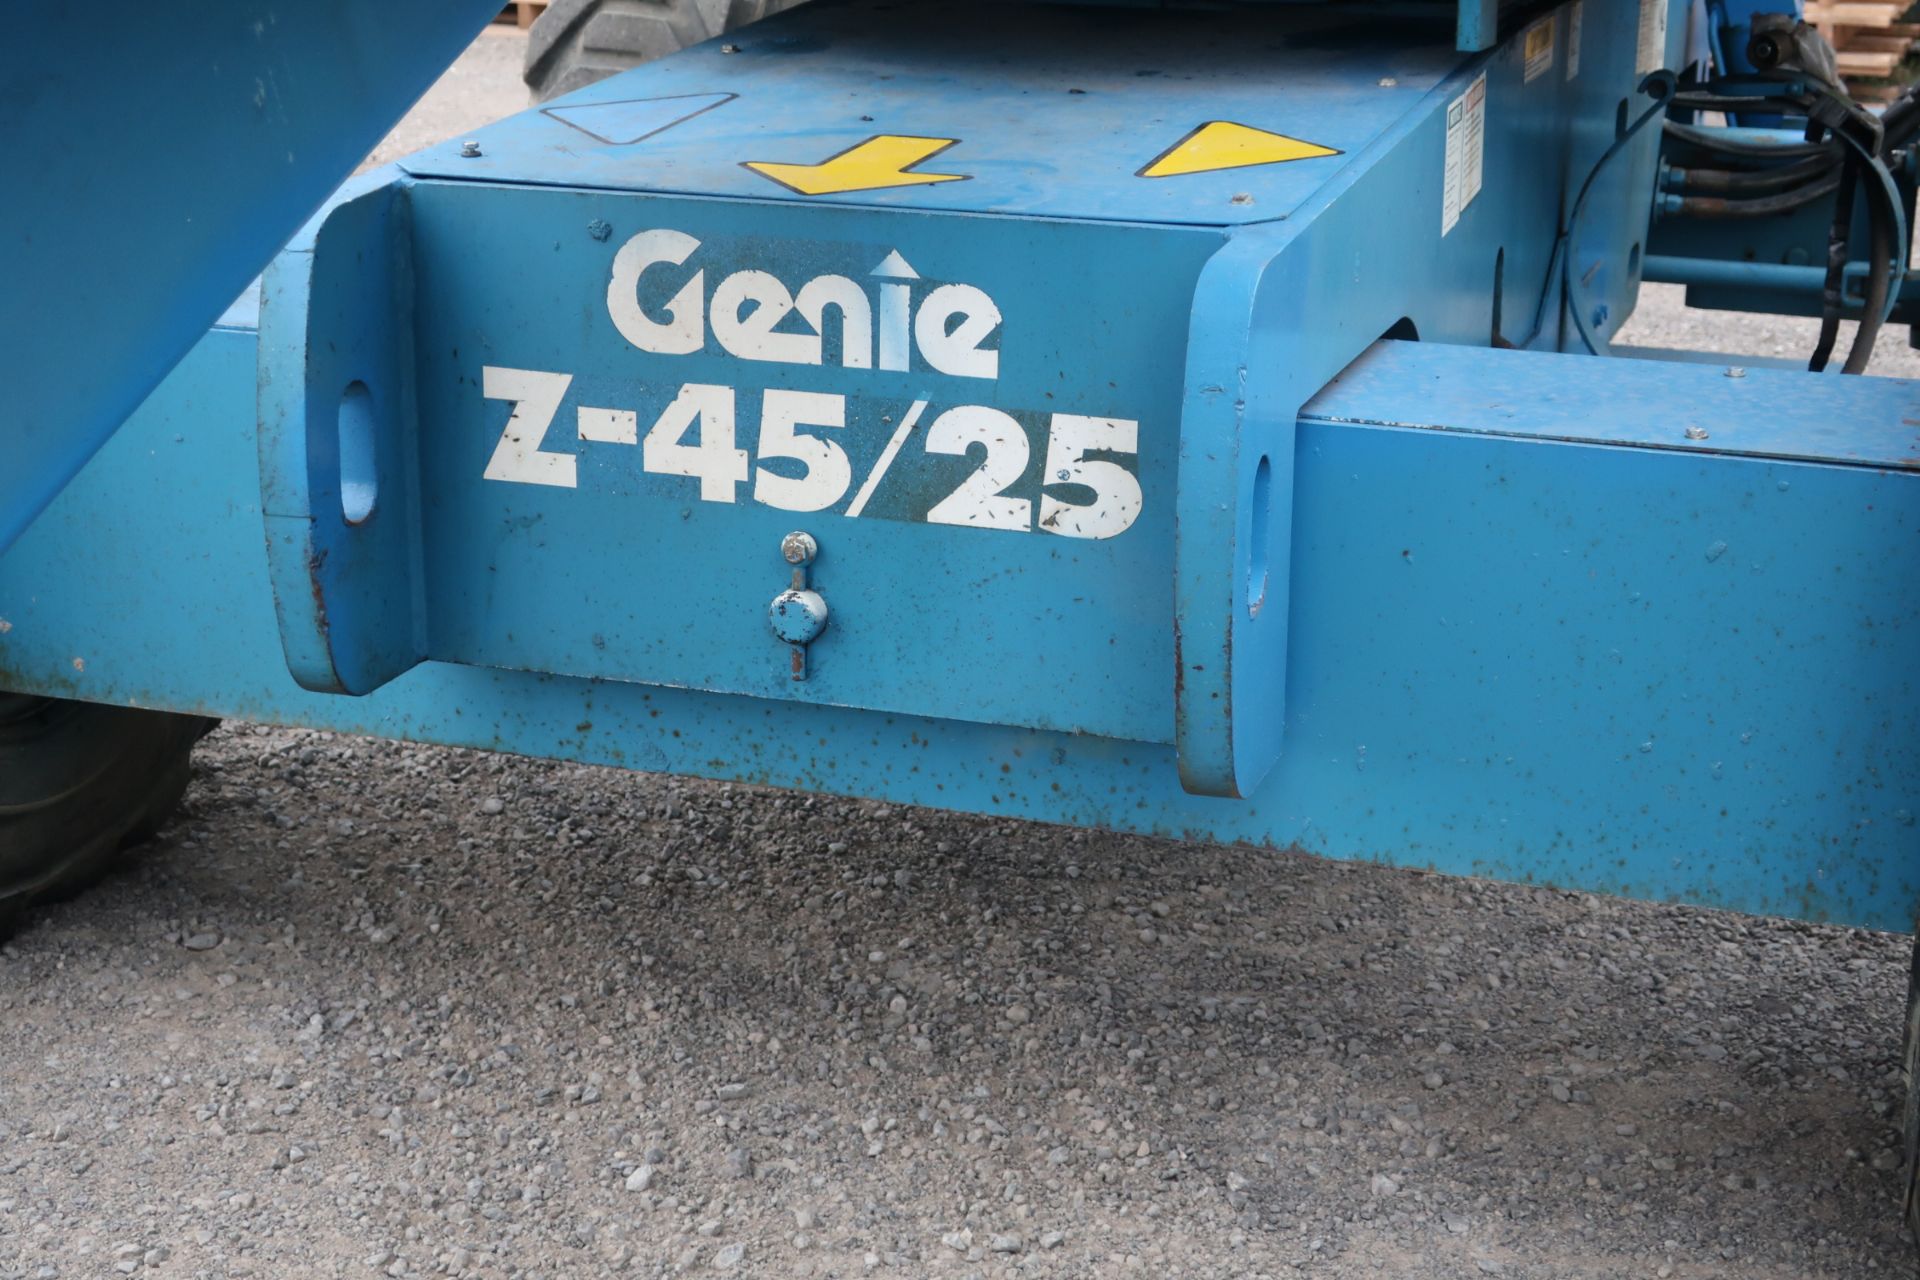 MINT Genie Zoom Boom 4x4 Articulating Lift model Z-45/25 45' height DIESEL UNIT LOW HOURS with non- - Image 6 of 6